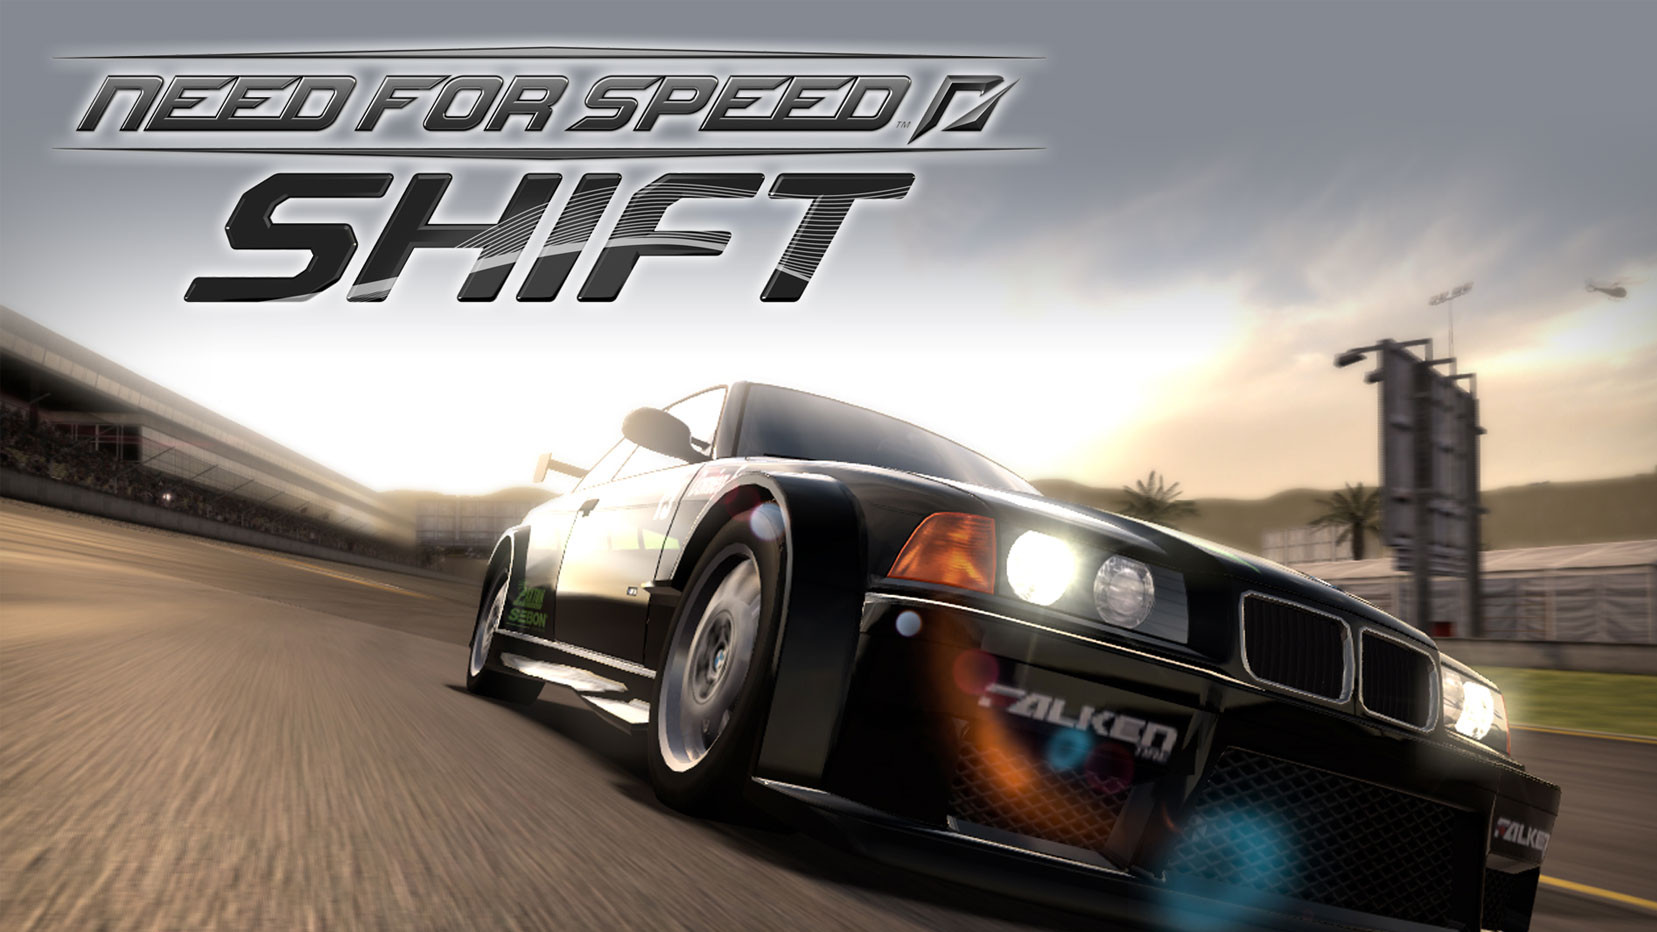 From the makers of Need for Speed: Shift